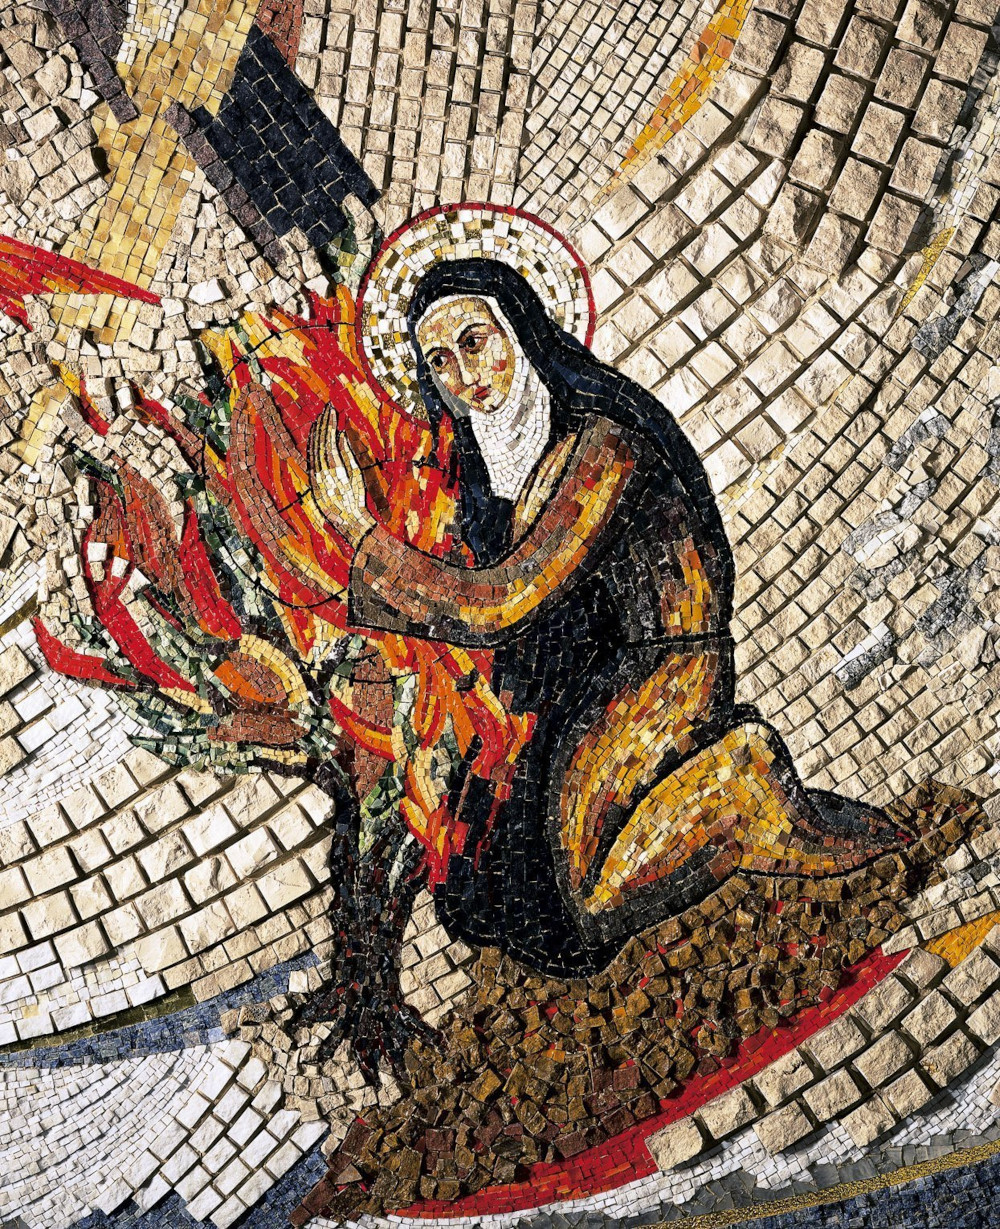 A mosaic featuring a woman wearing a white coif and black veil with arms around flames